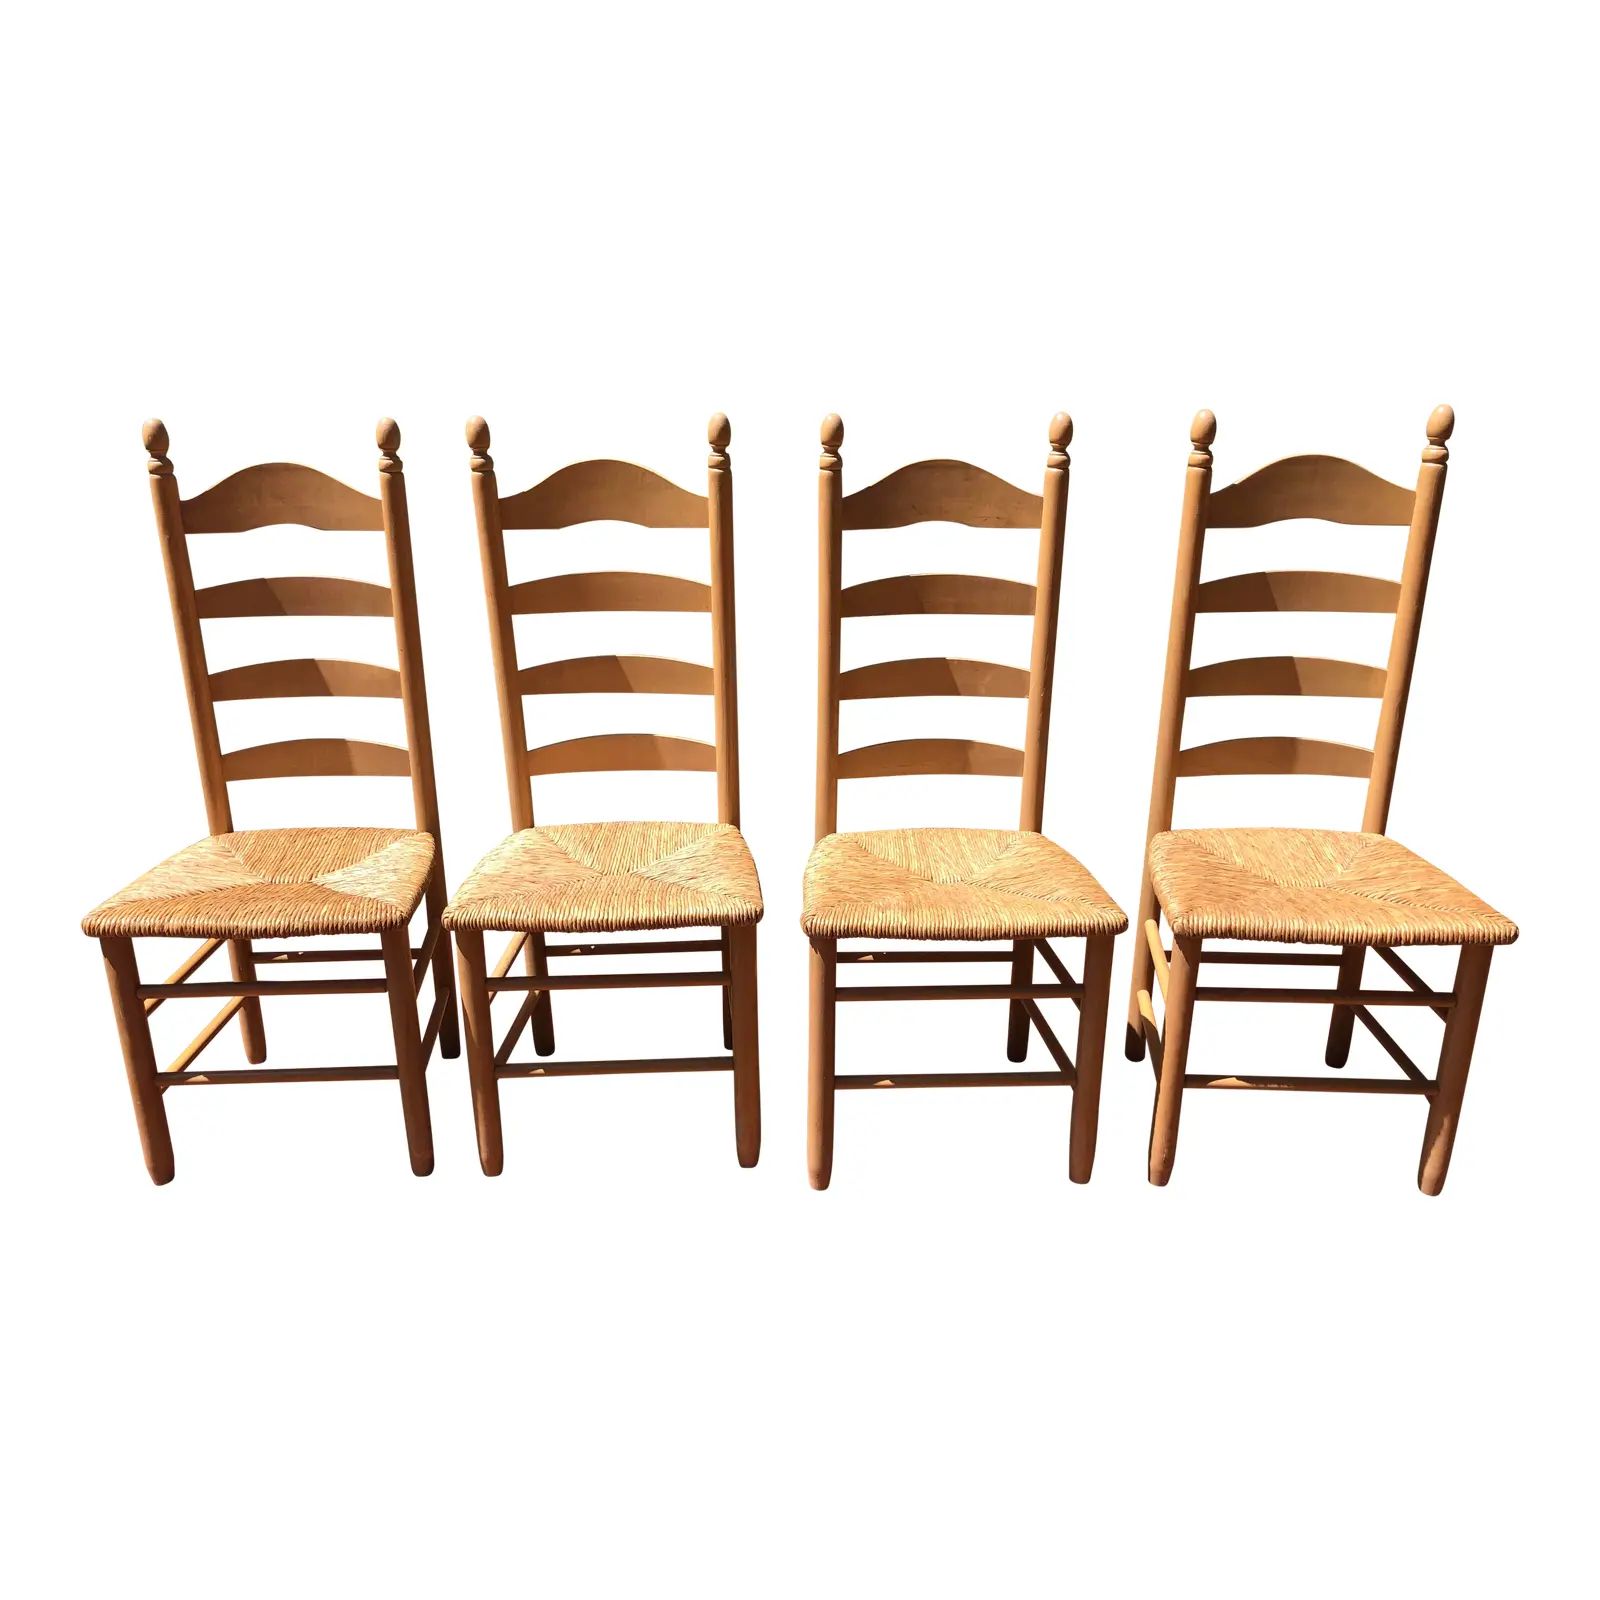 1990s Ladder Back Chairs - Set of 4 | Chairish